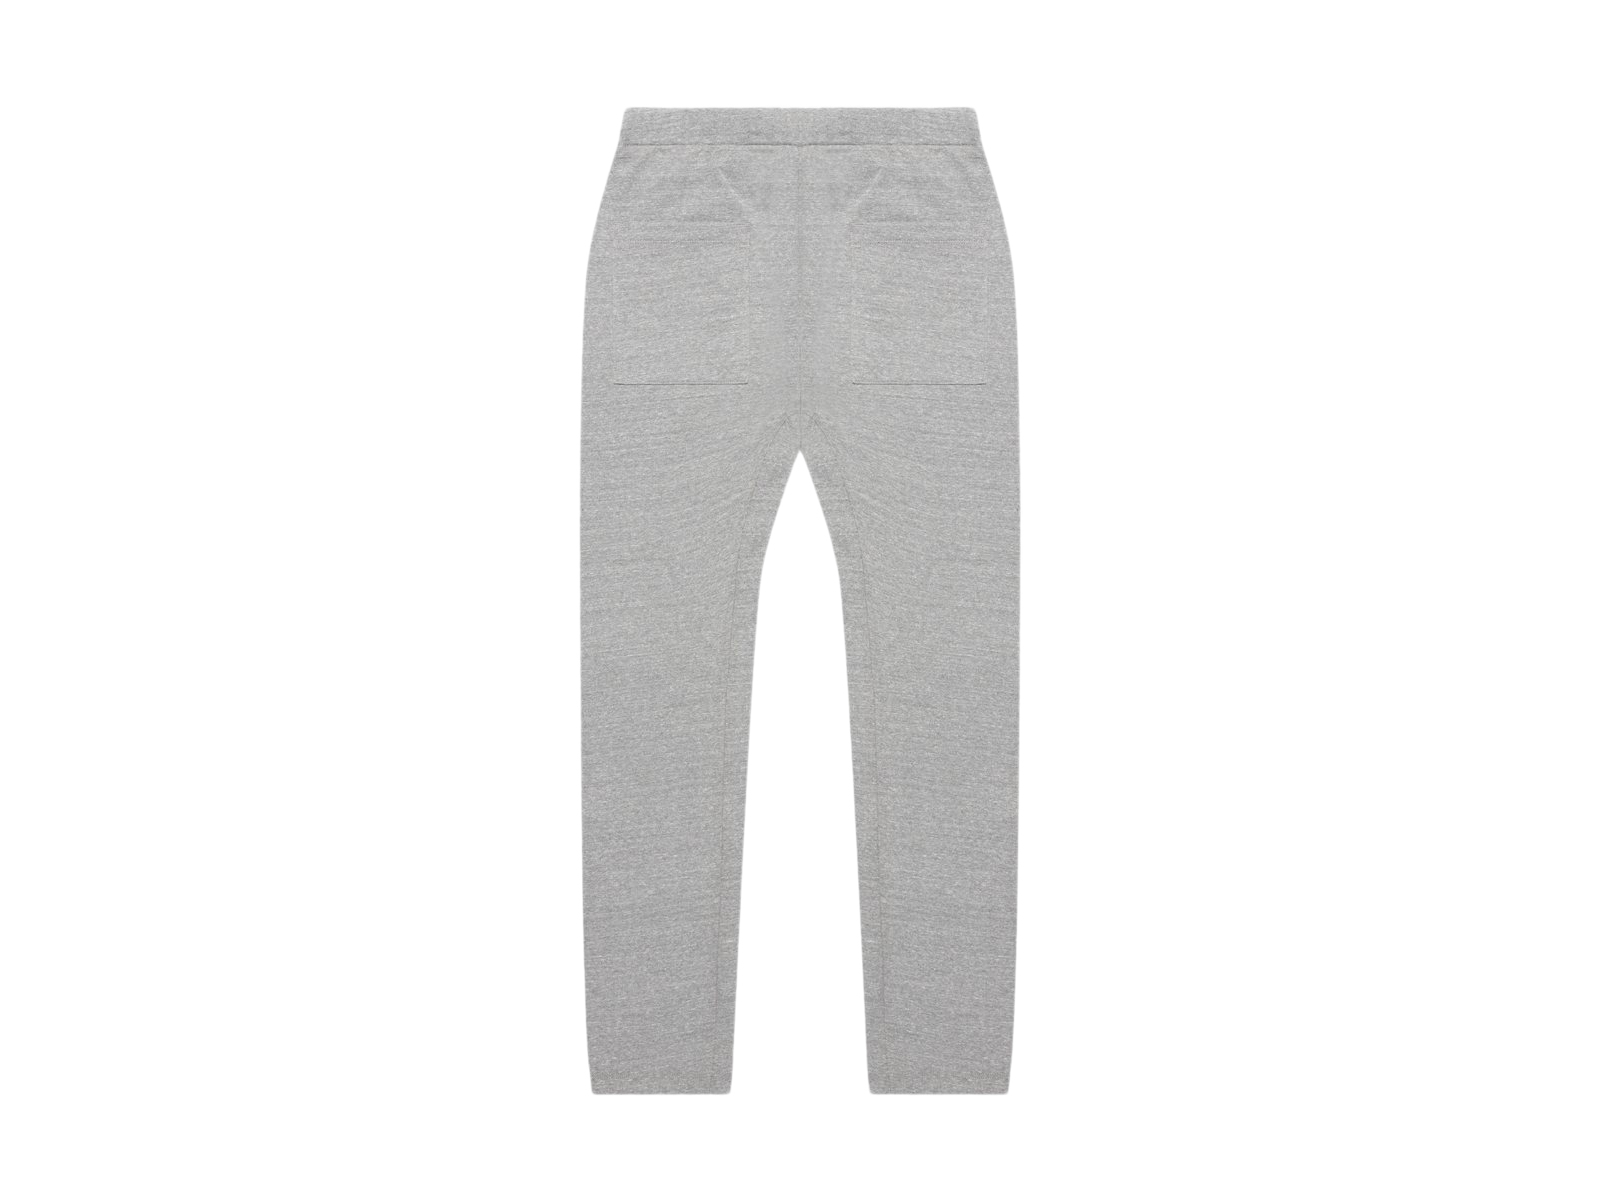 FEAR OF GOD Relaxed Sweatpants Heather Grey - SIXTH COLLECTION - CN